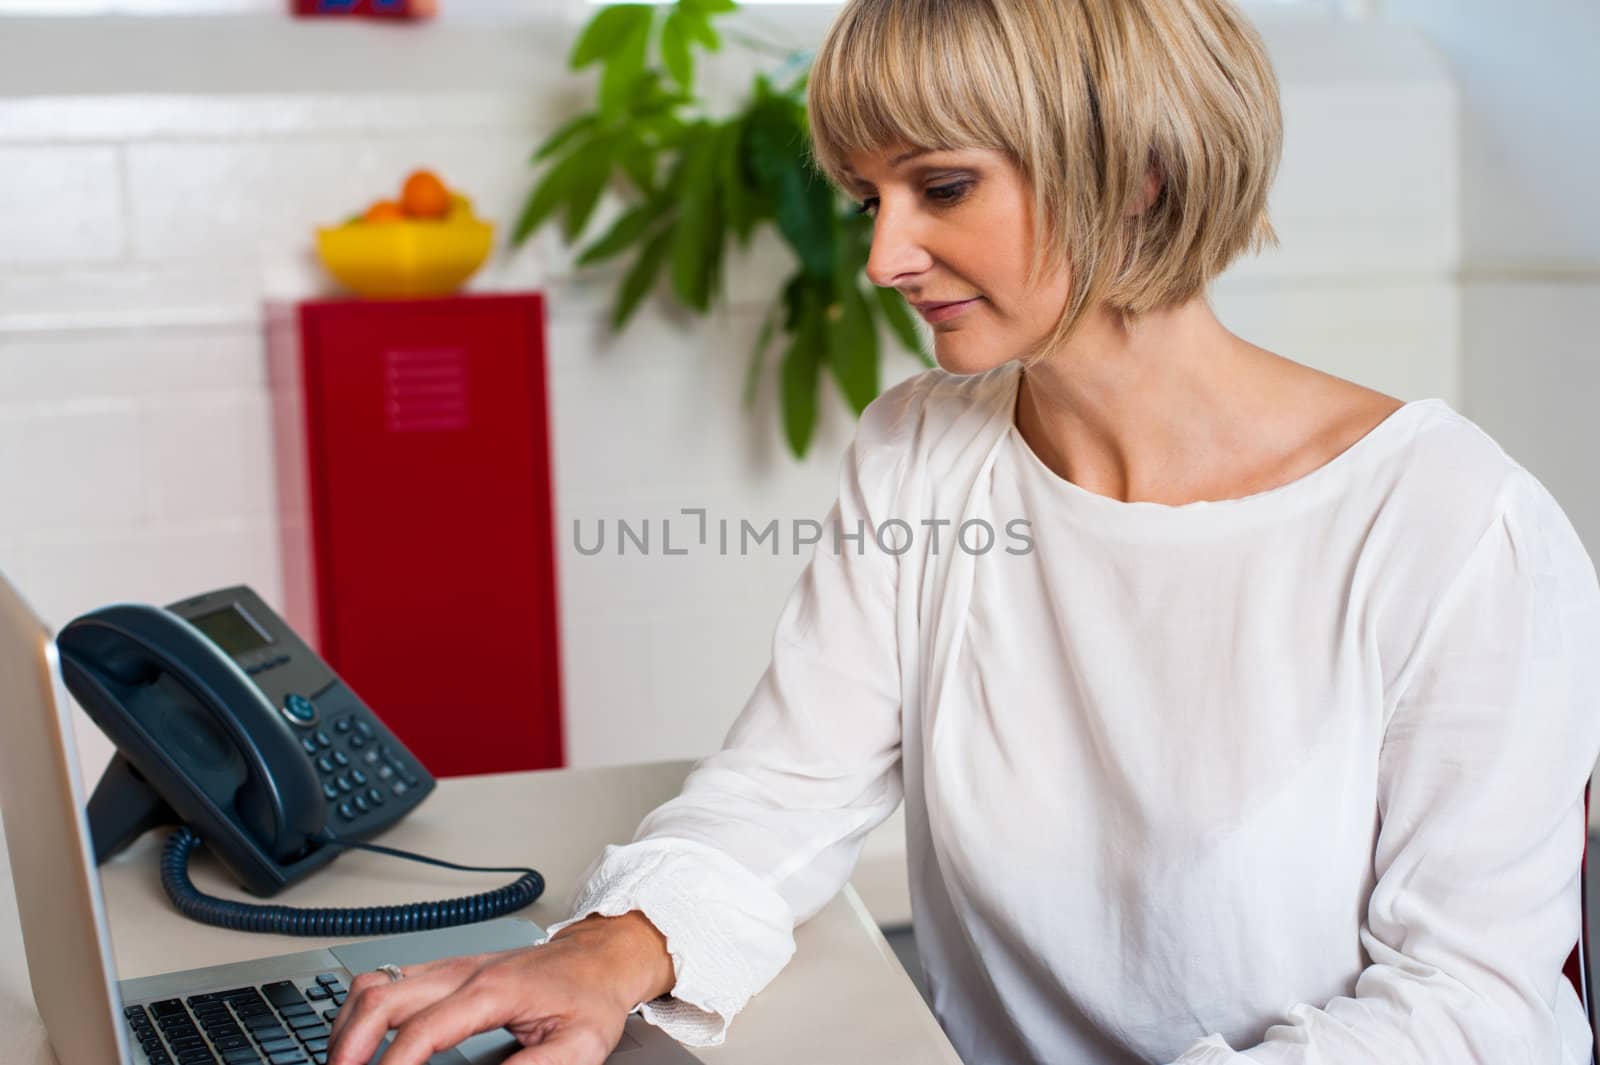 Expressionless female working on a laptop by stockyimages